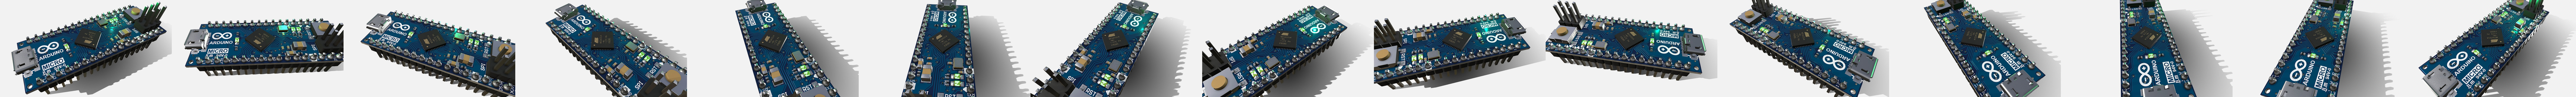 Arduino Micro, 3D CAD Model Library